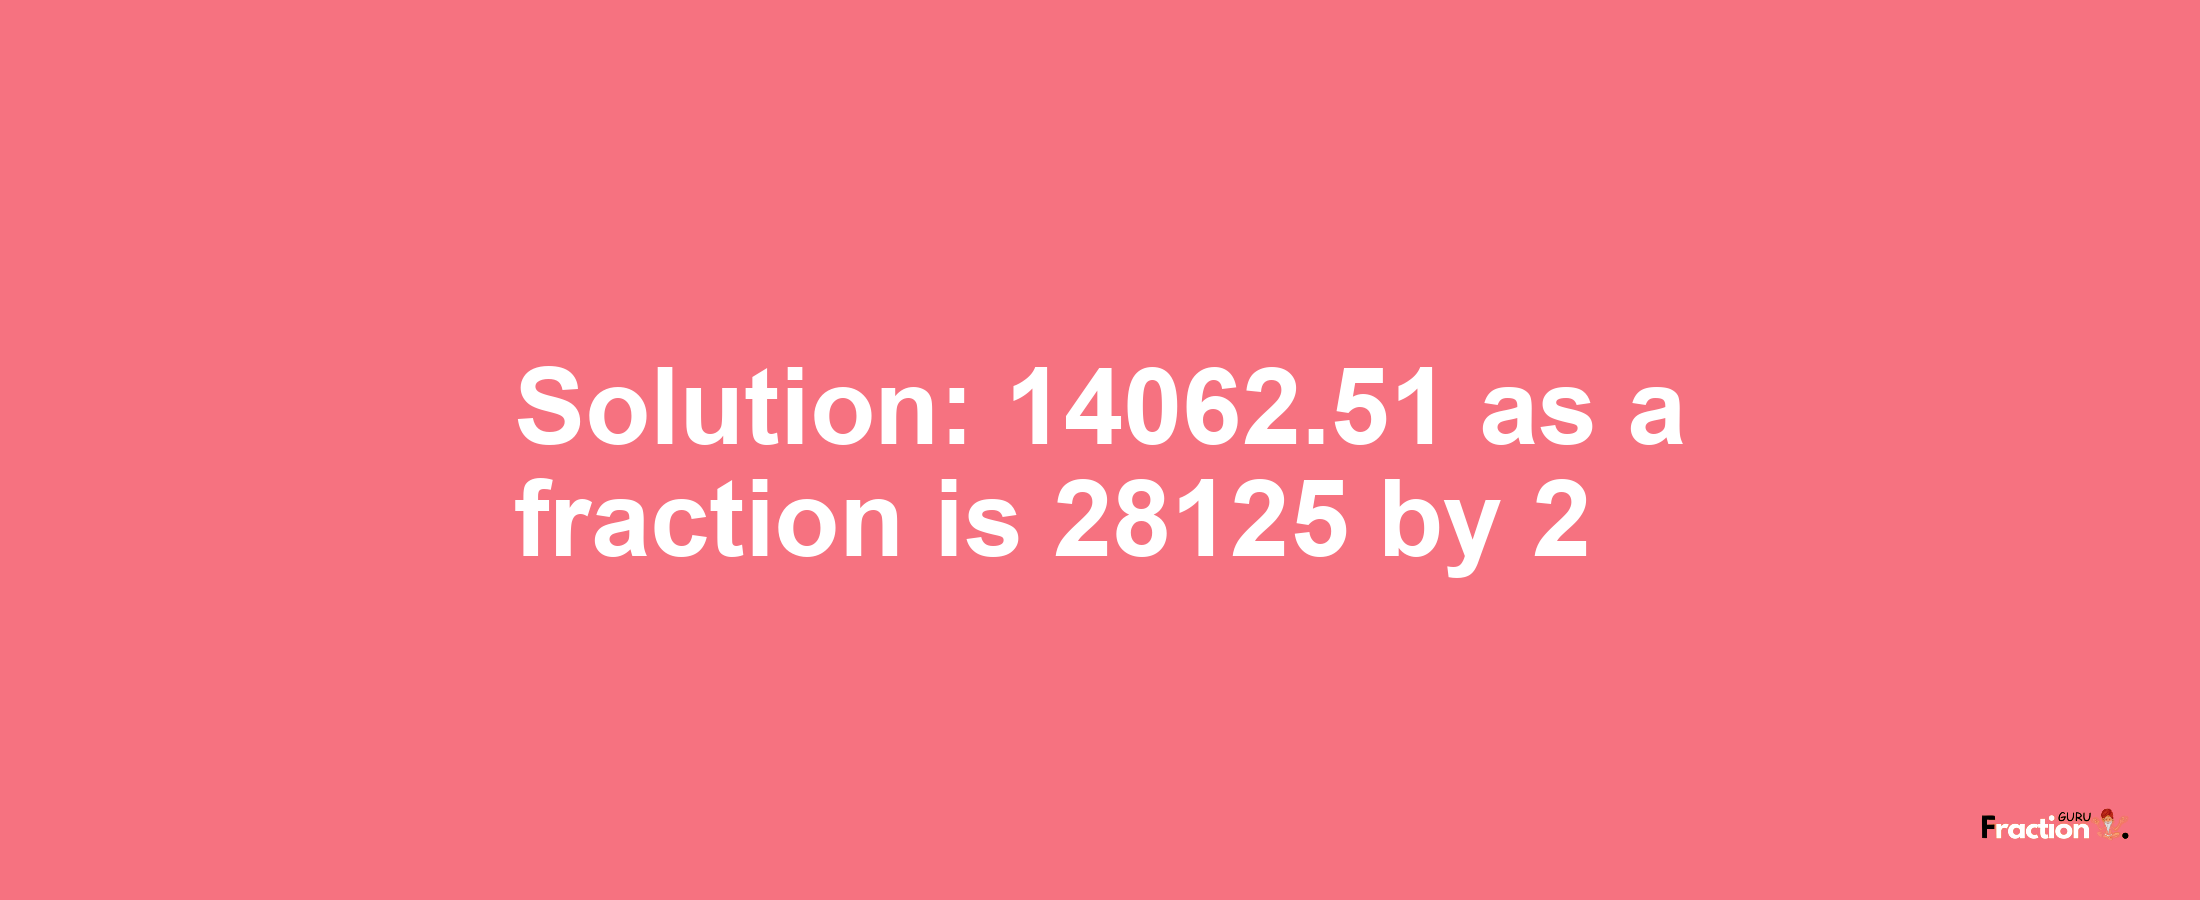 Solution:14062.51 as a fraction is 28125/2